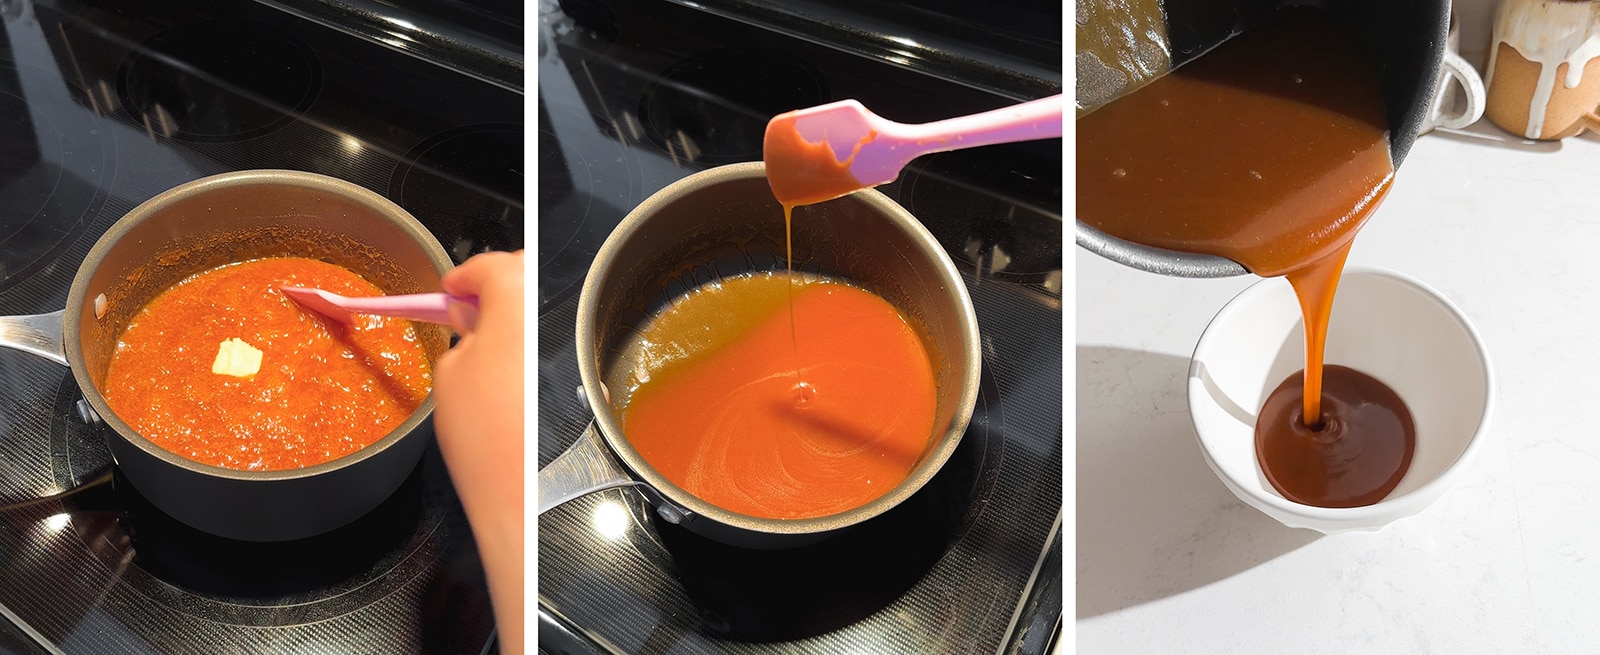 Stirring butter into salted caramel and pouring it into a bowl.